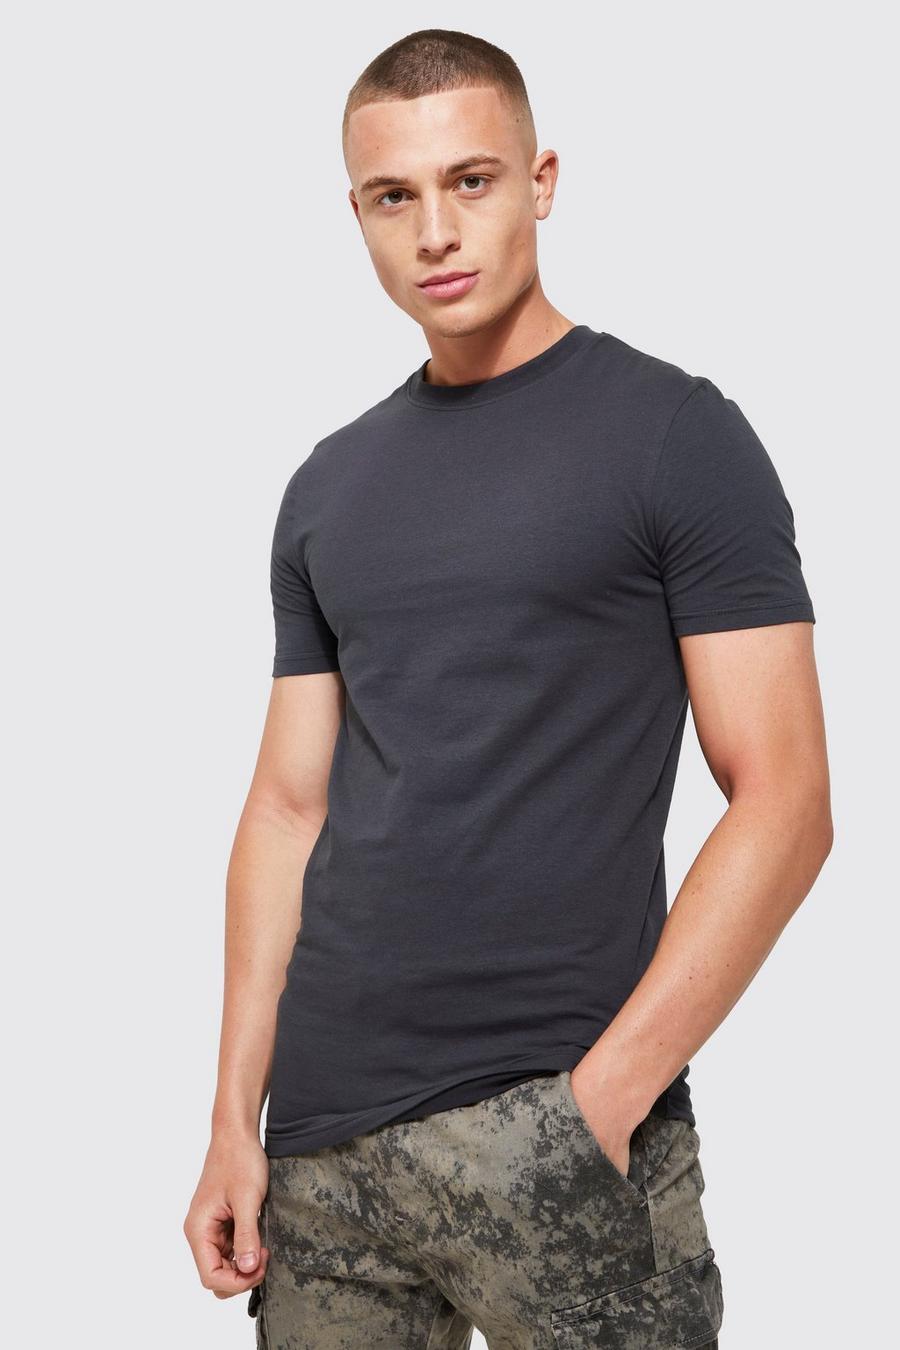 Charcoal grey Longline Muscle Fit T-Shirt image number 1